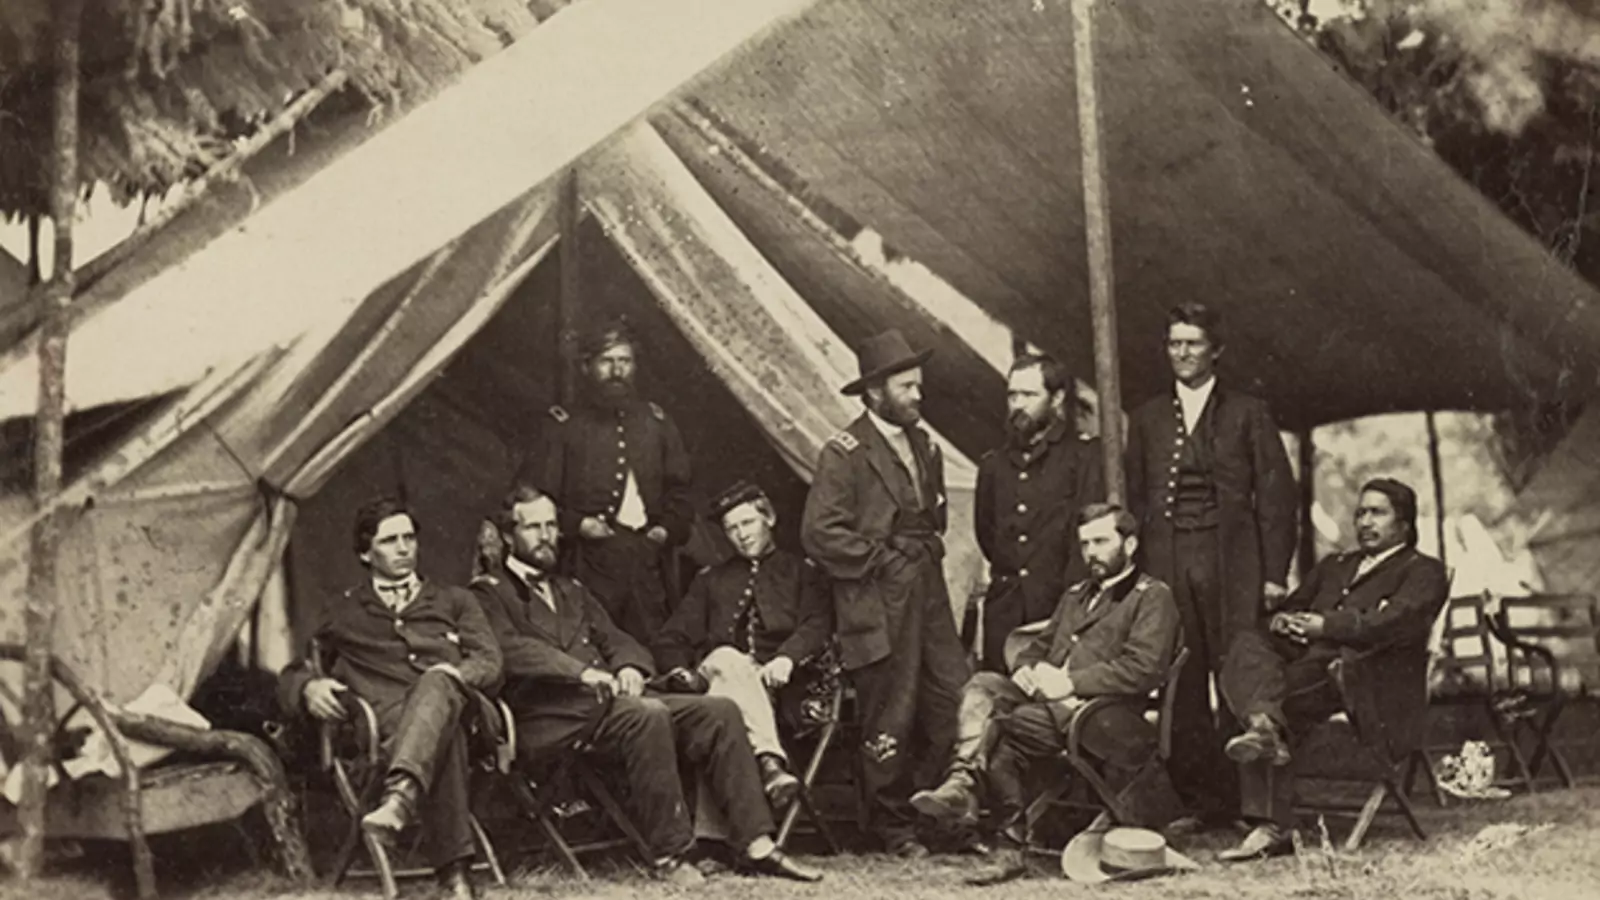 Union General Ulysses S. Grant and his staff in the summer of 1864. 